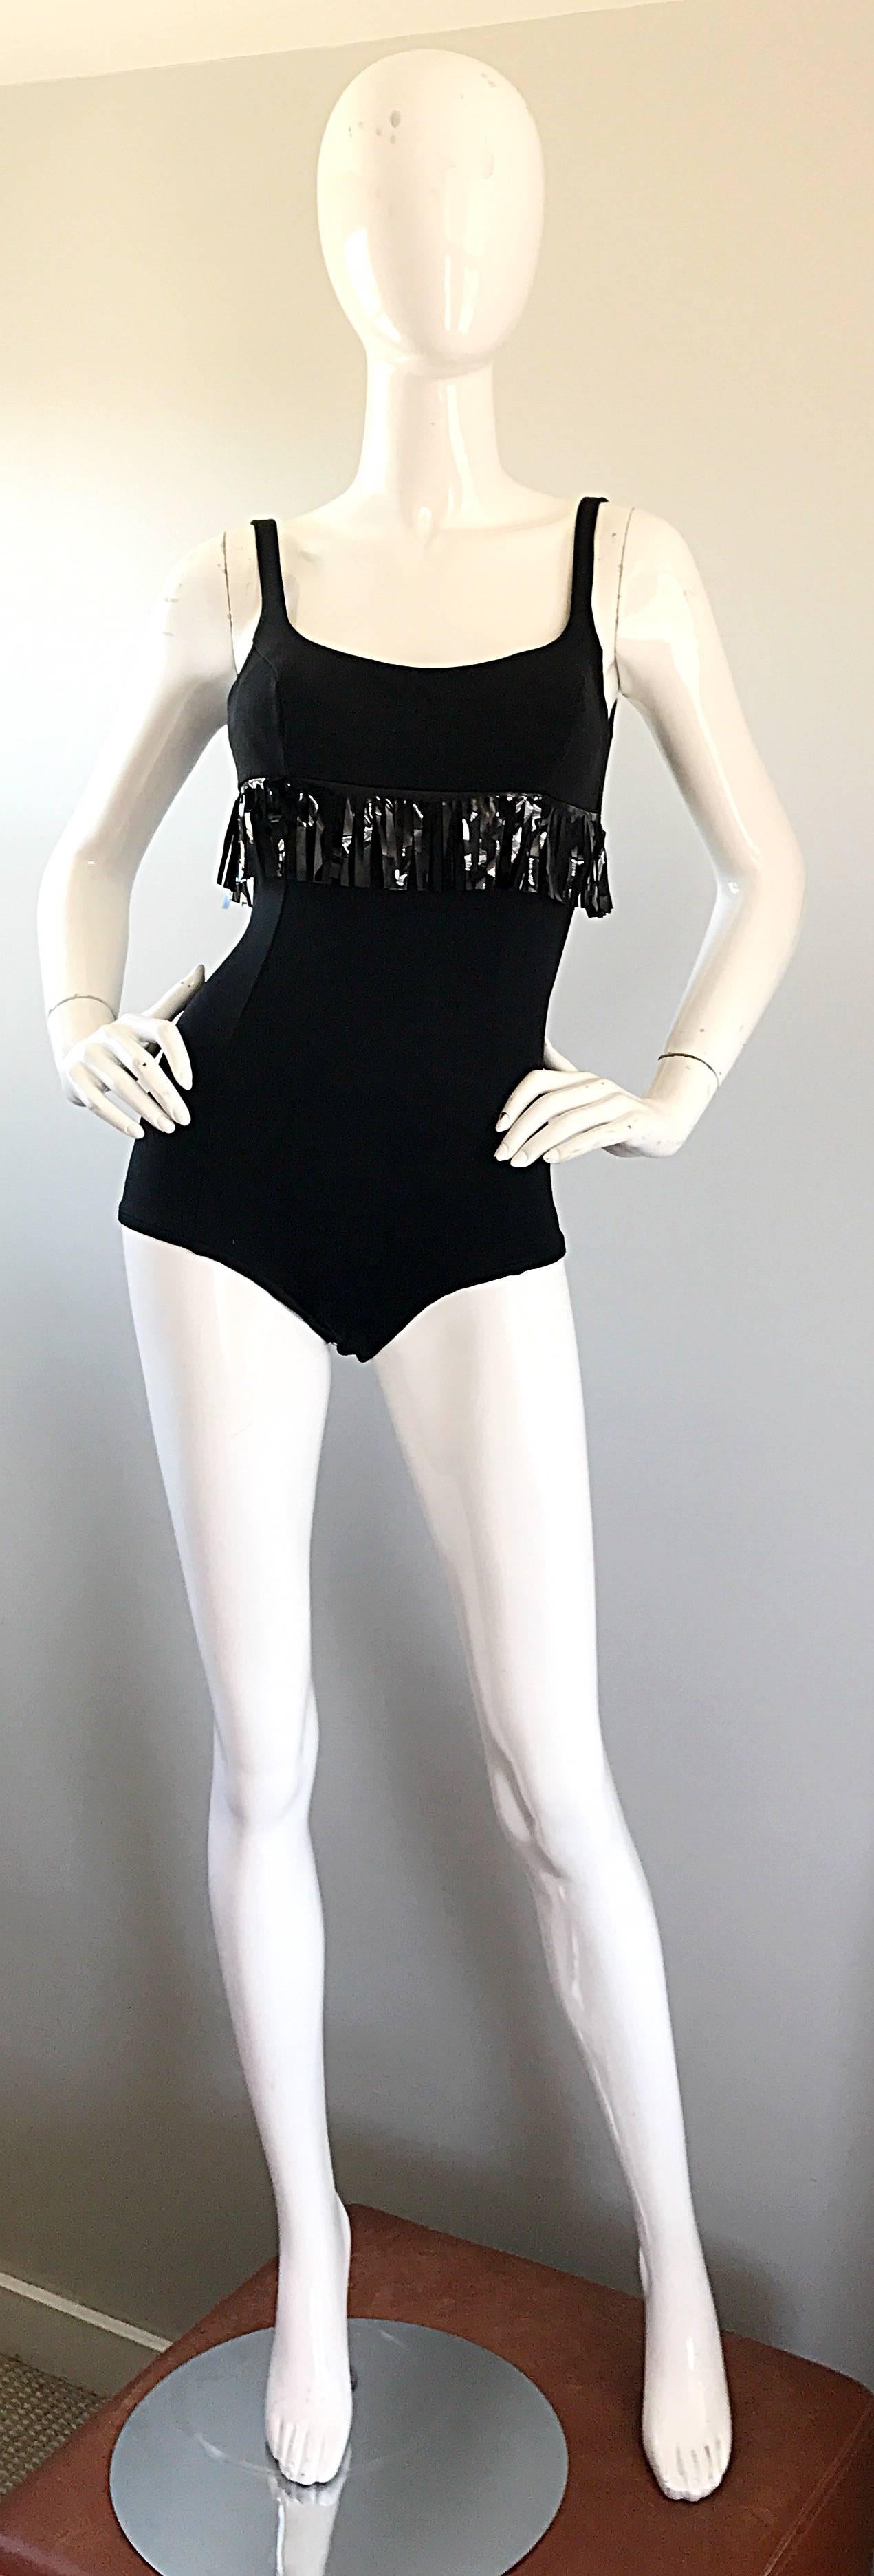 Super chic OLEG CASSINI 1960s black vinyl fringe swimsuit or bodysuit! Flattering boy cut cover the buttocks perfectly, and stretches to fit. Black vinyl fringe below the waist. Adjustable straps can be made shorter or longer to fit. Can easily work